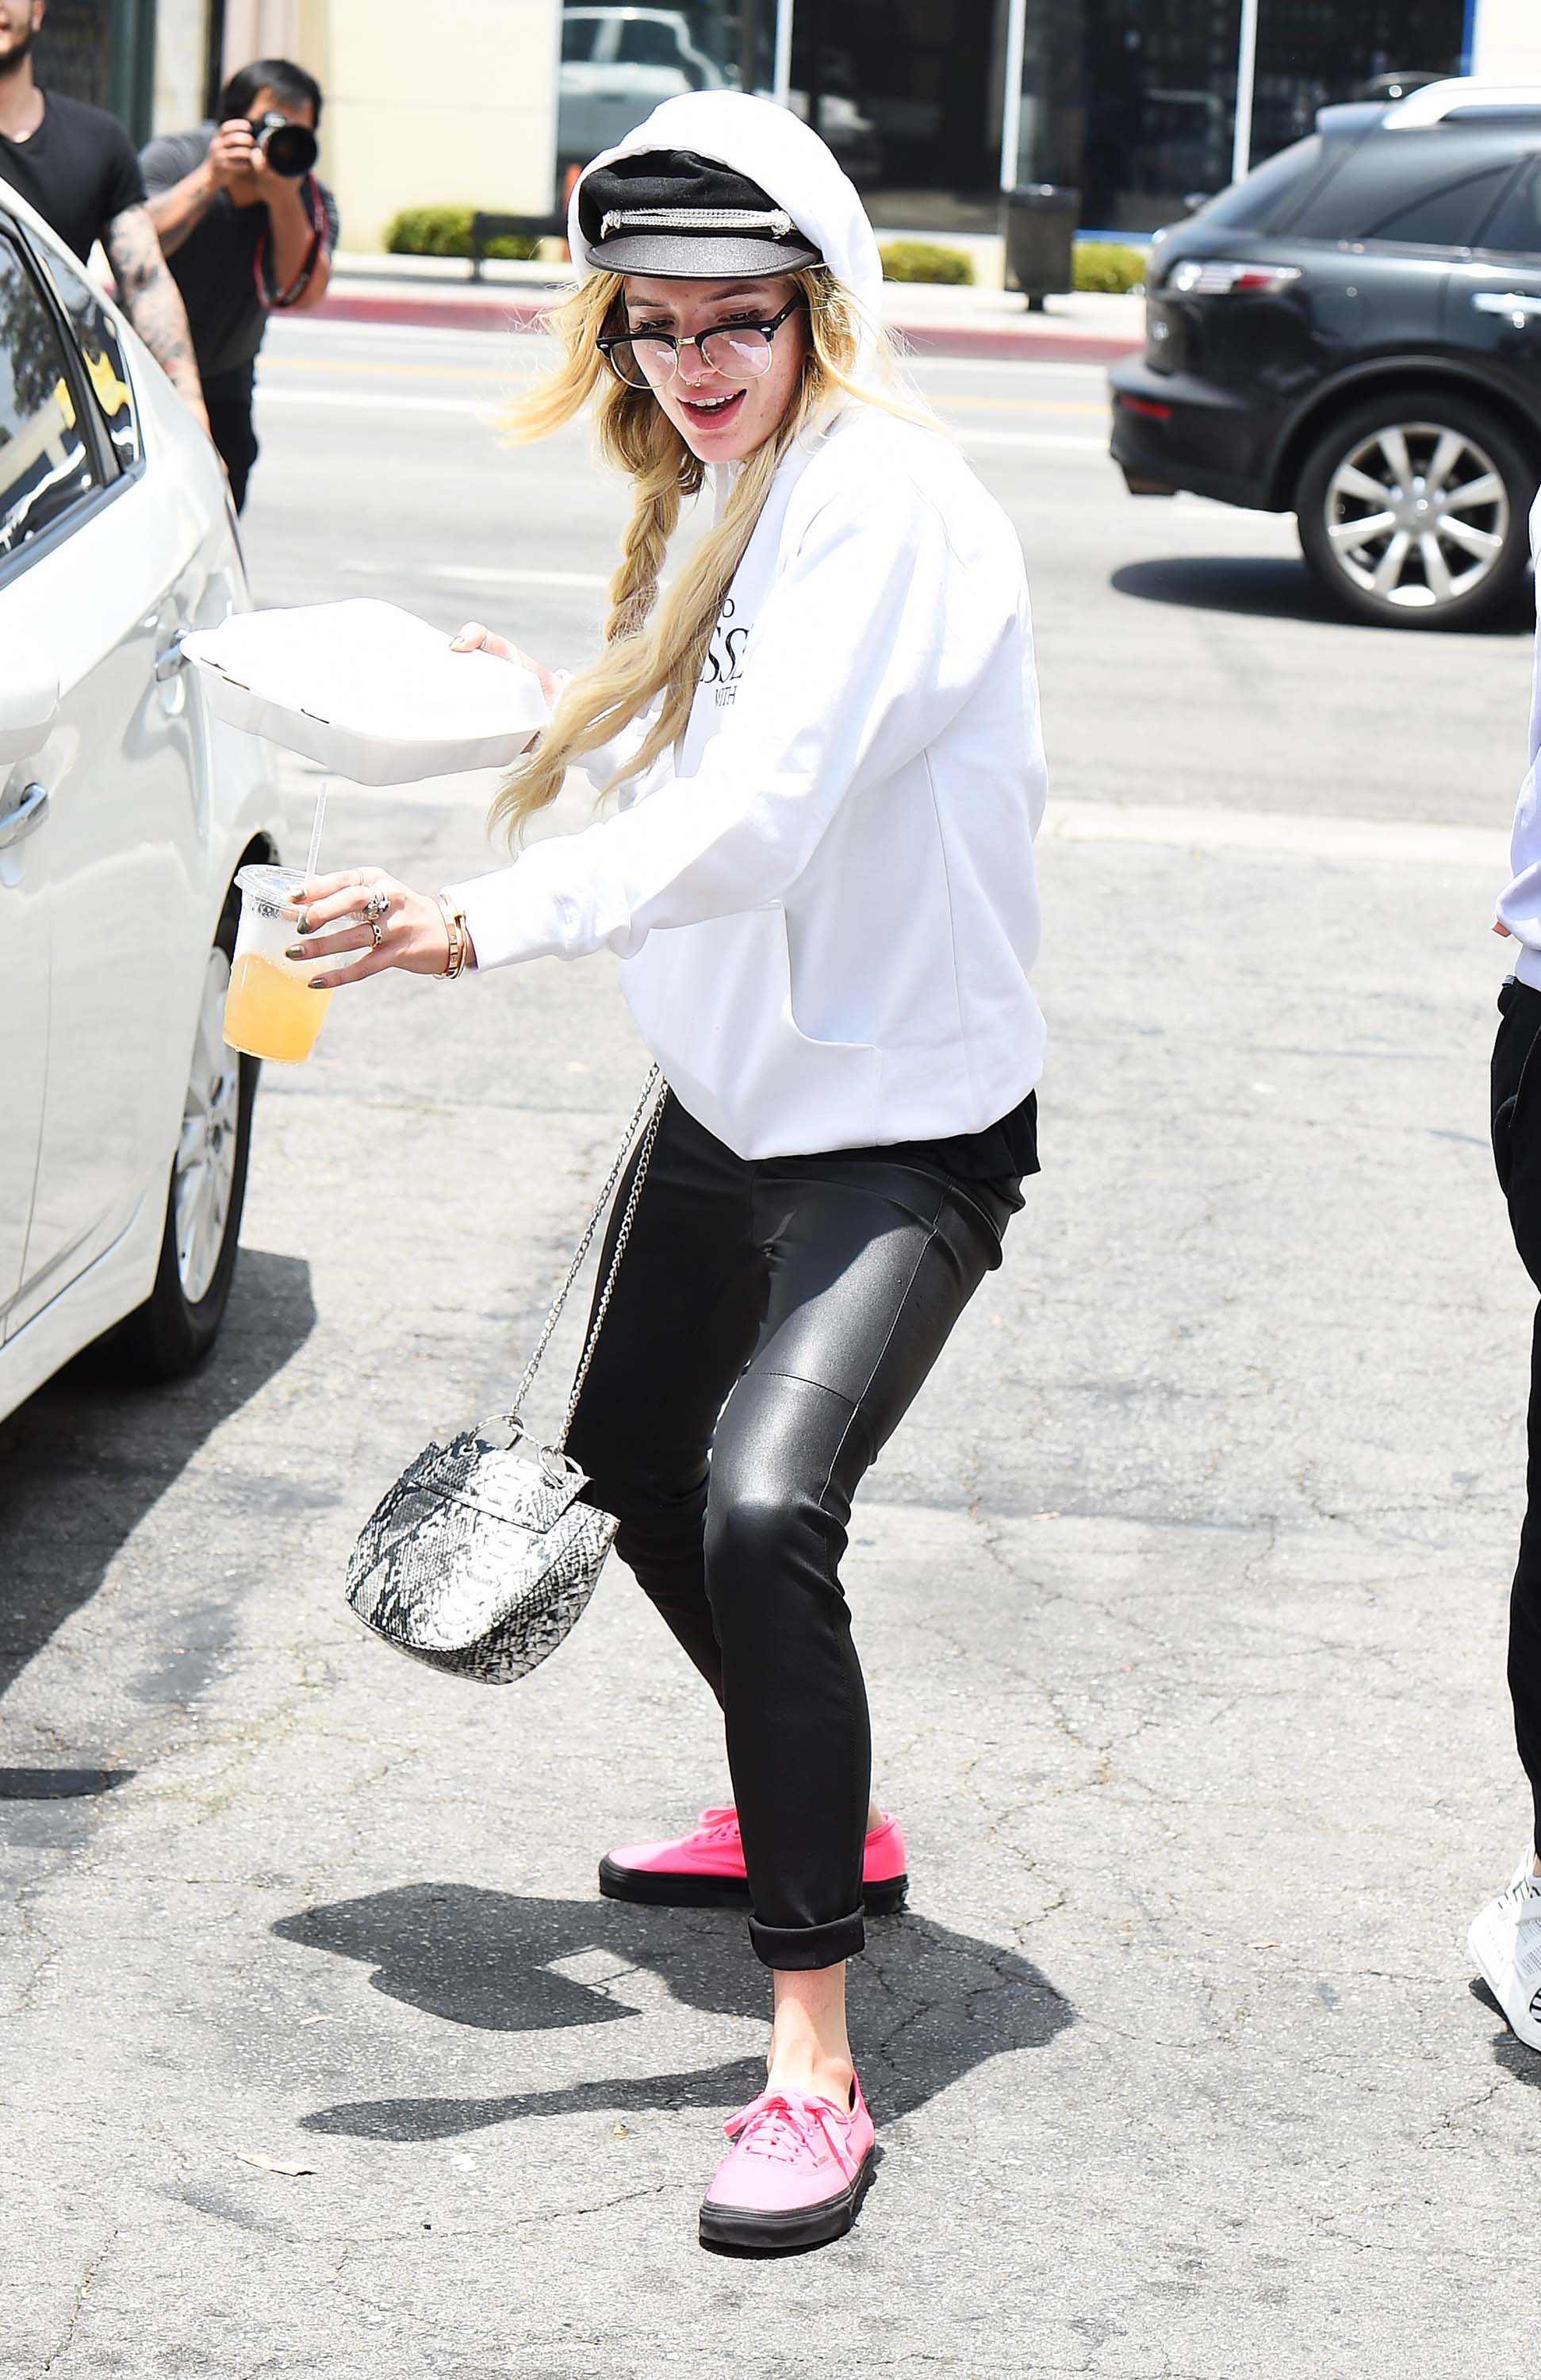 Bella Thorne out and about on the streets of LA